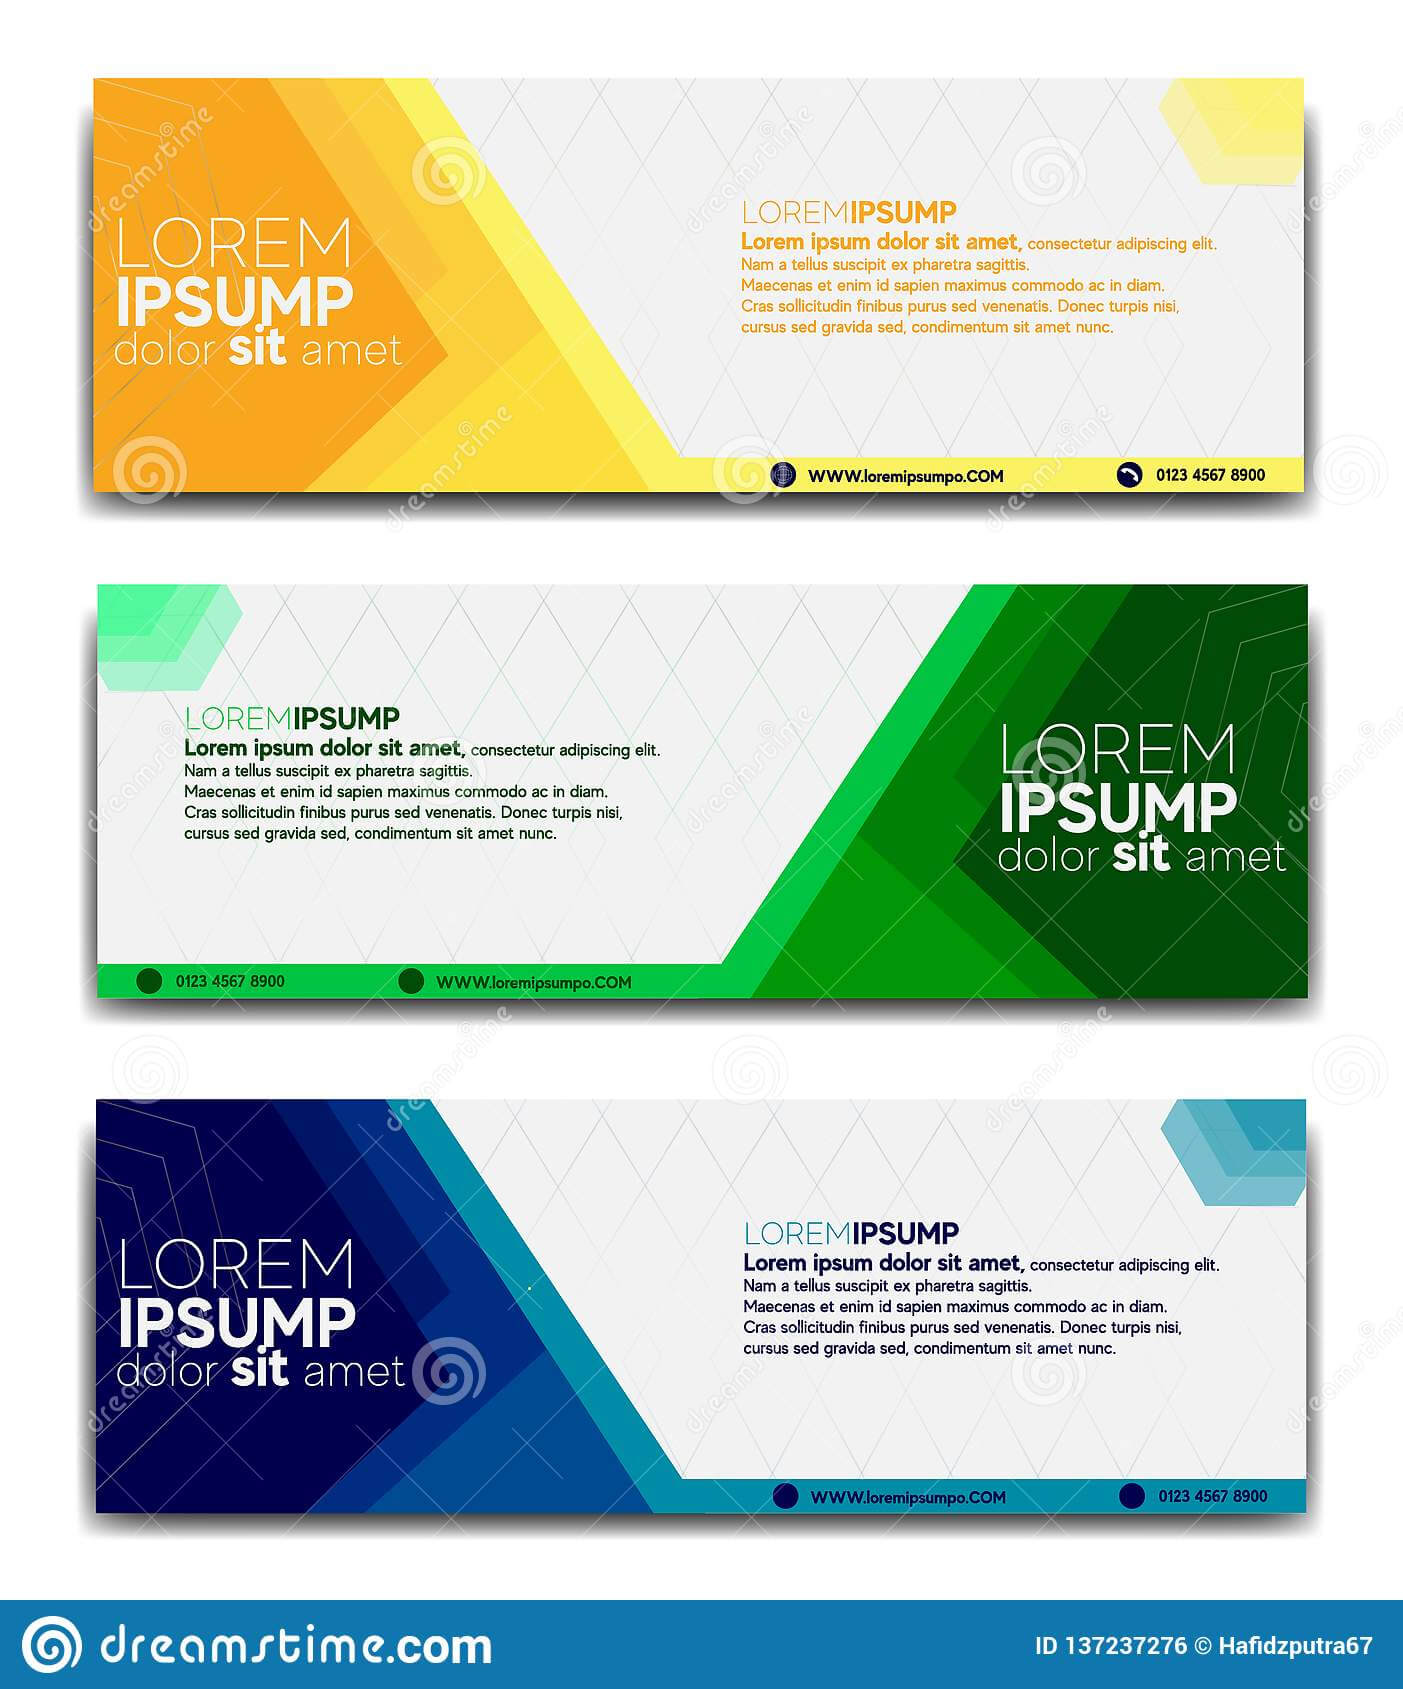 Promotional Banner Design Template 2019 Stock Vector Inside Website Banner Design Templates